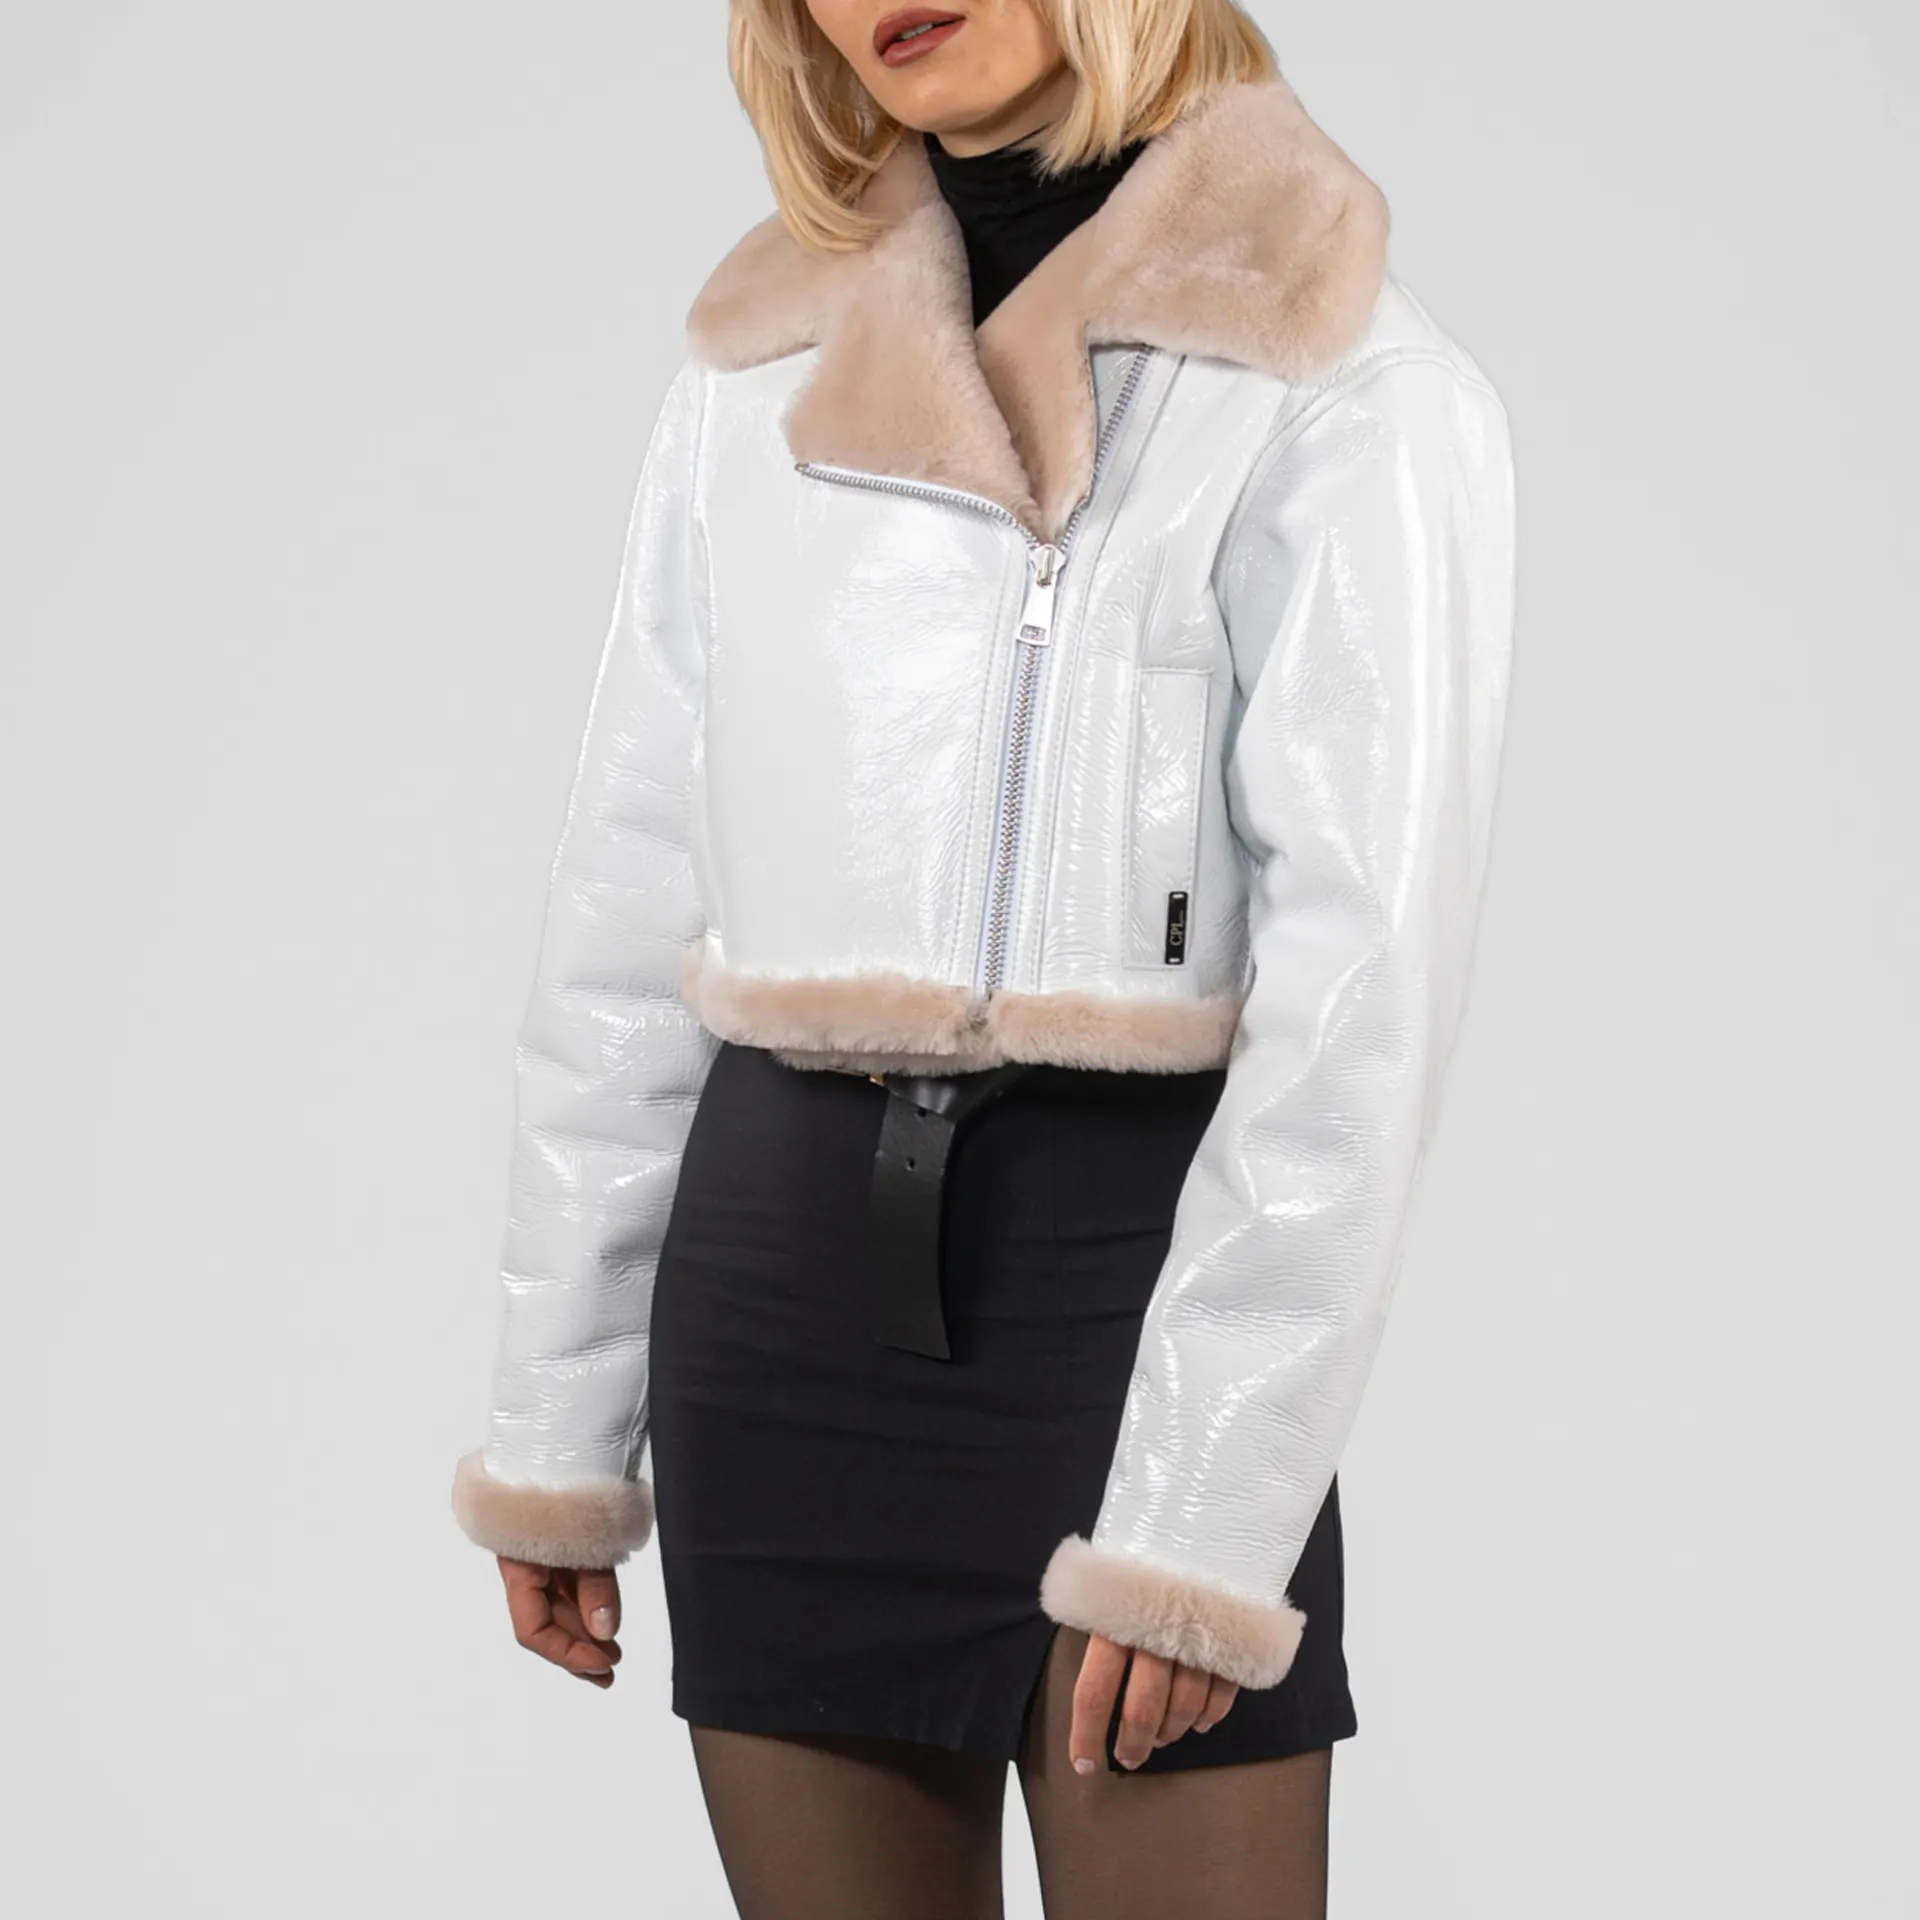 Hot Selling Women's Fashion Leather Jackets concealed side zip pockets Length 44cm In white color interior part is in pink color